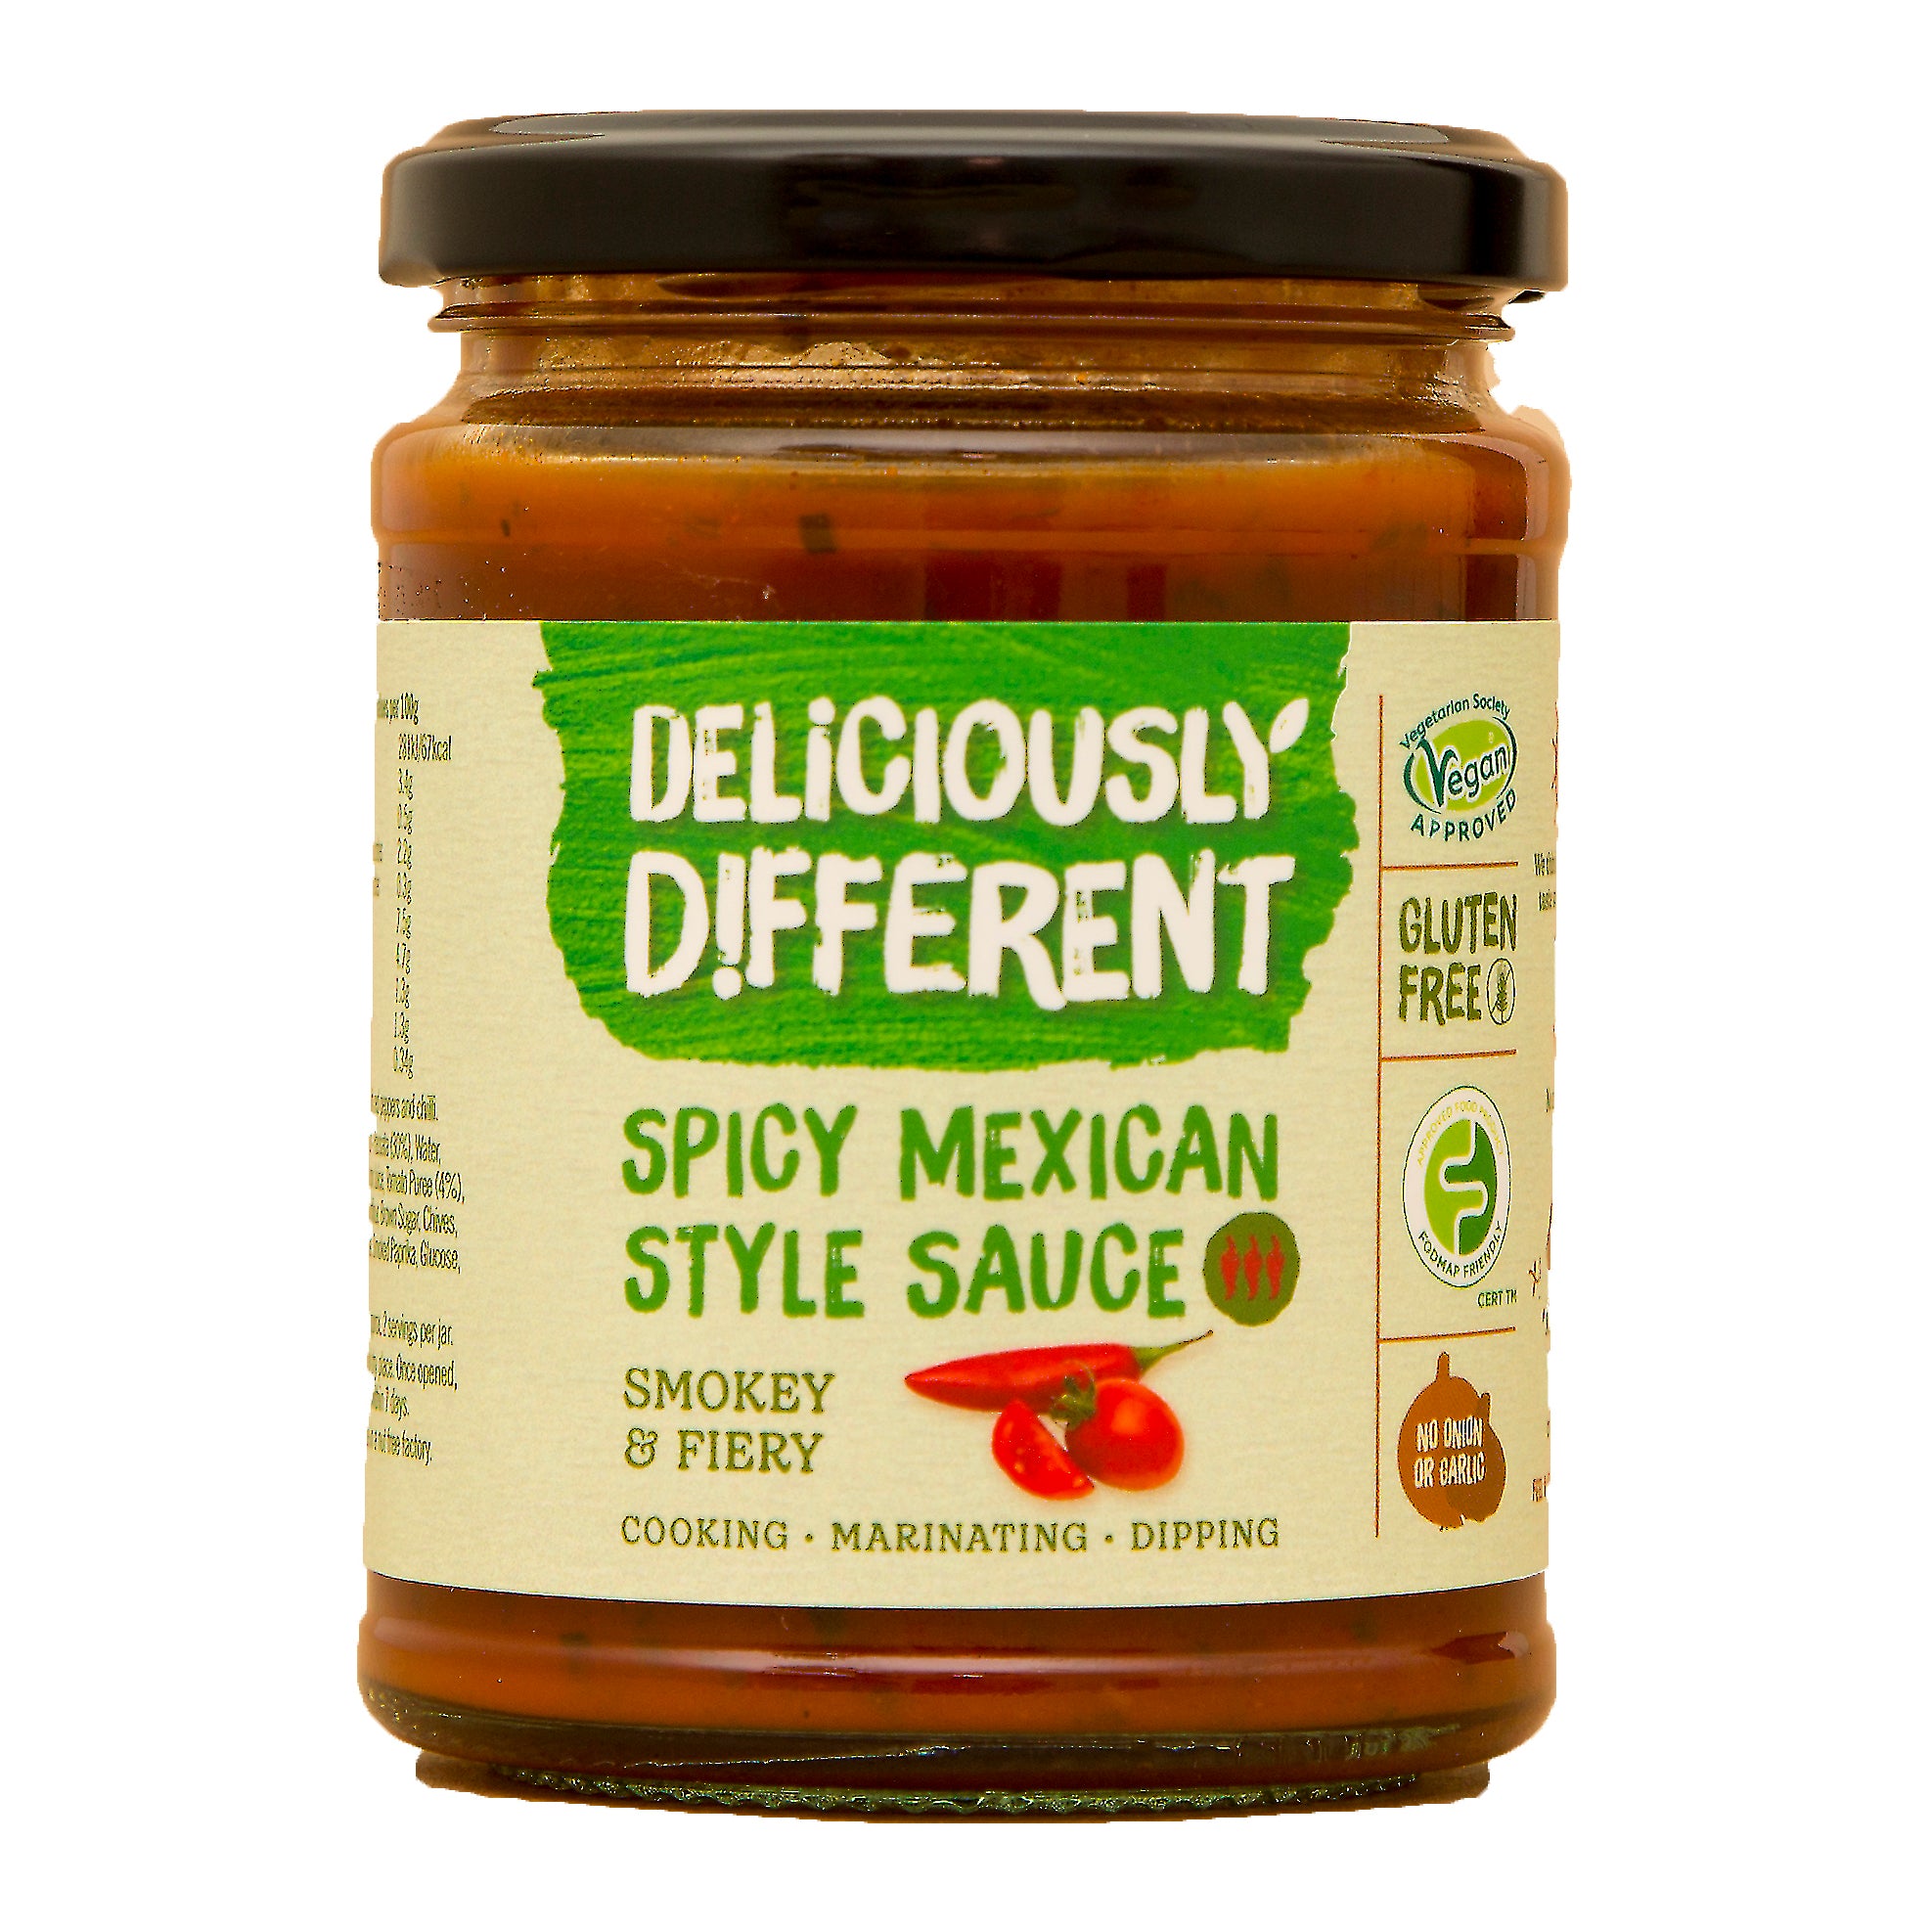 Spicy Mexican Style Sauce